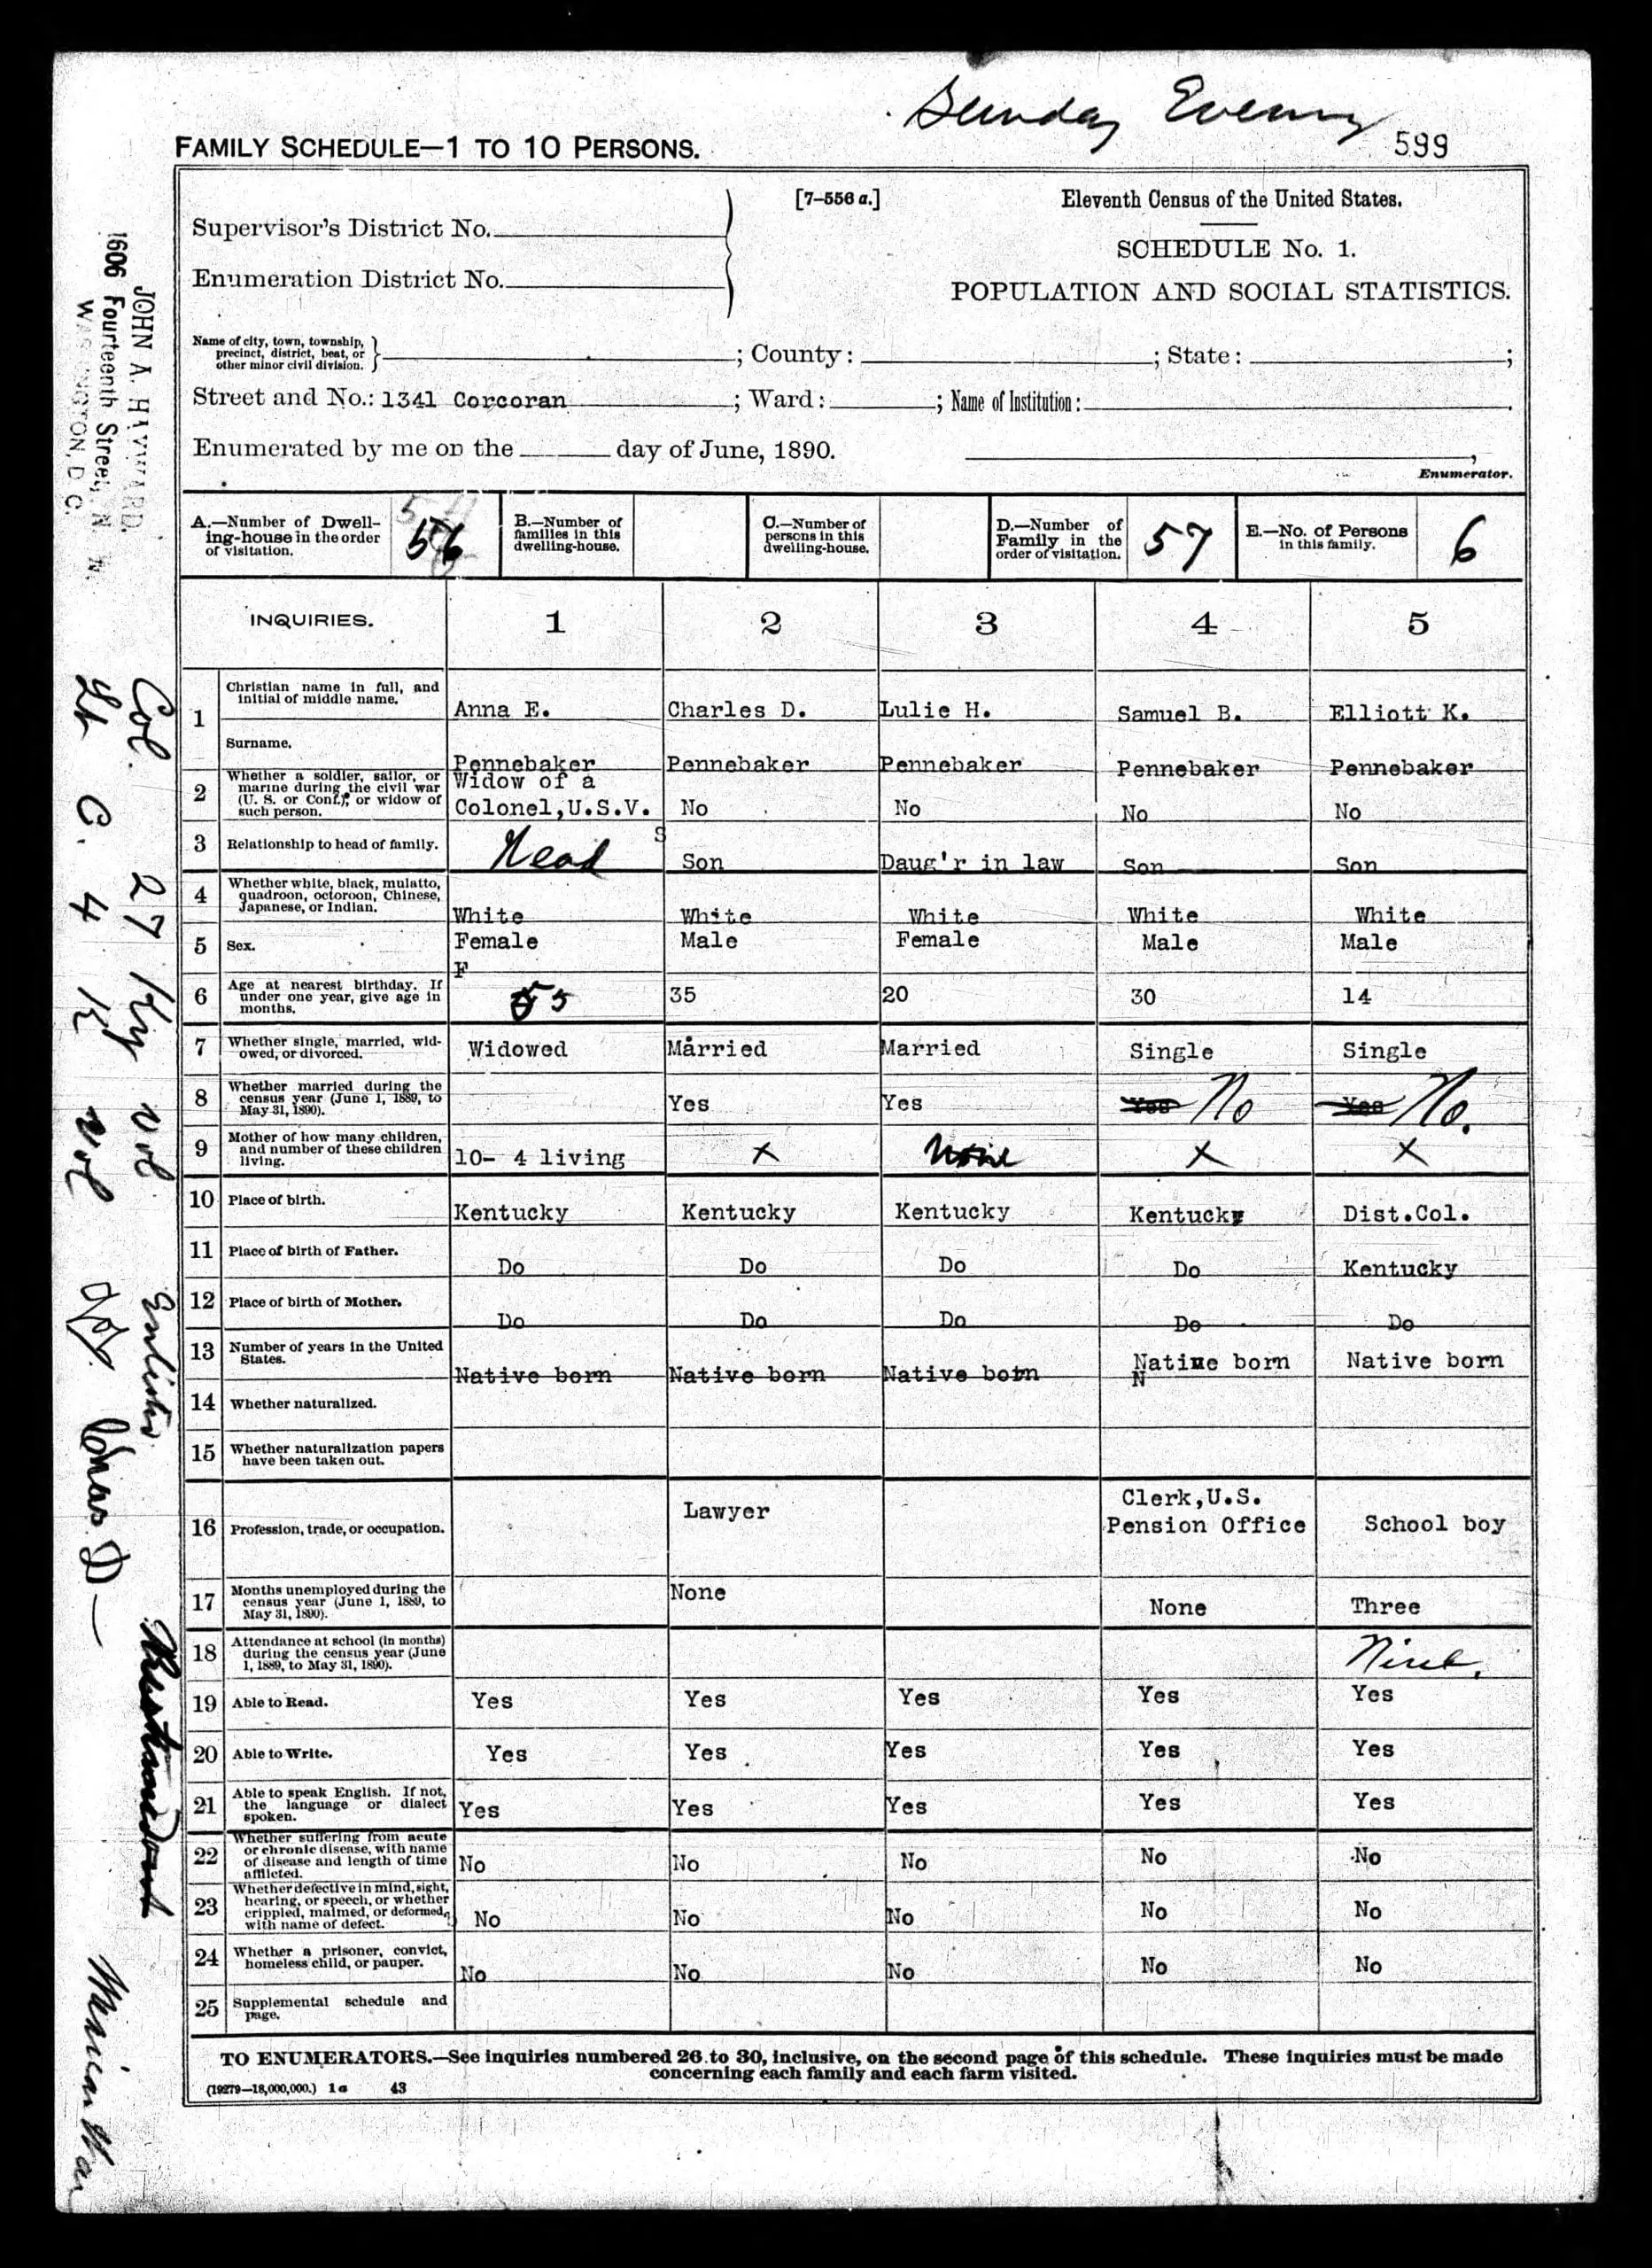 The Pennebaker family in the 189 U.S. Census (Ancestry.com)